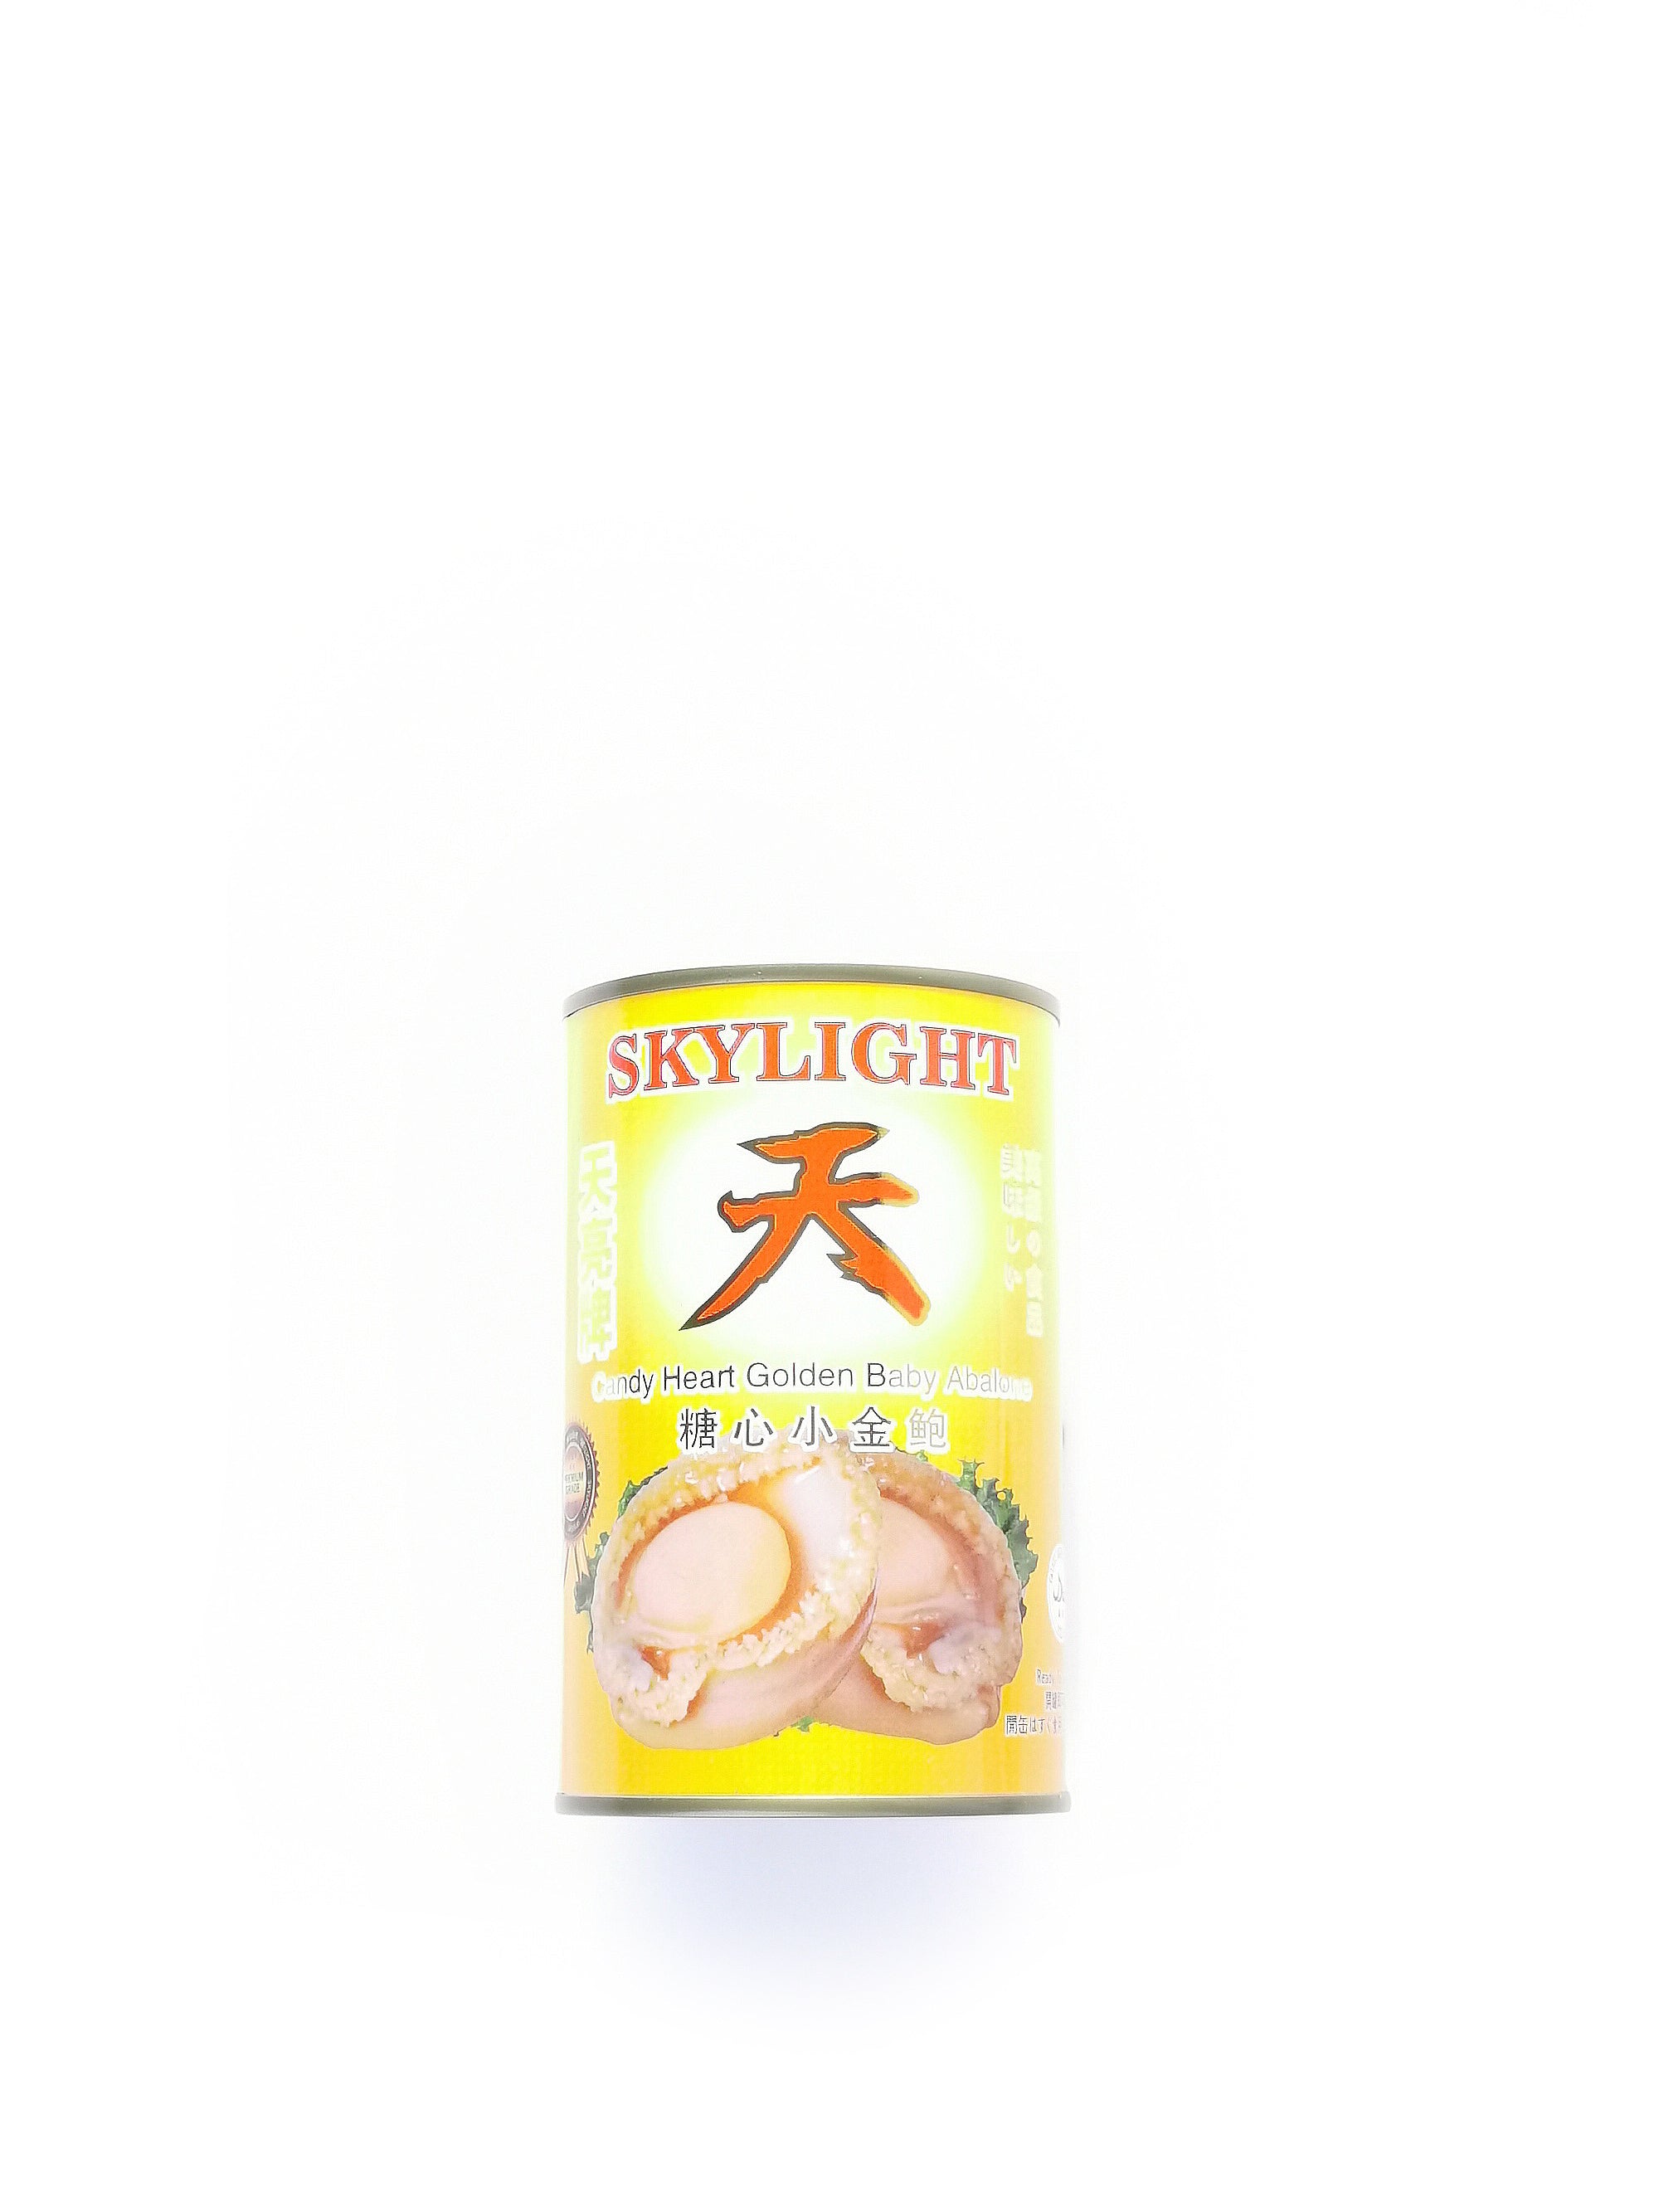 Skylight Candy Heart Golden Baby Abalone 天亮牌溏心小金鮑